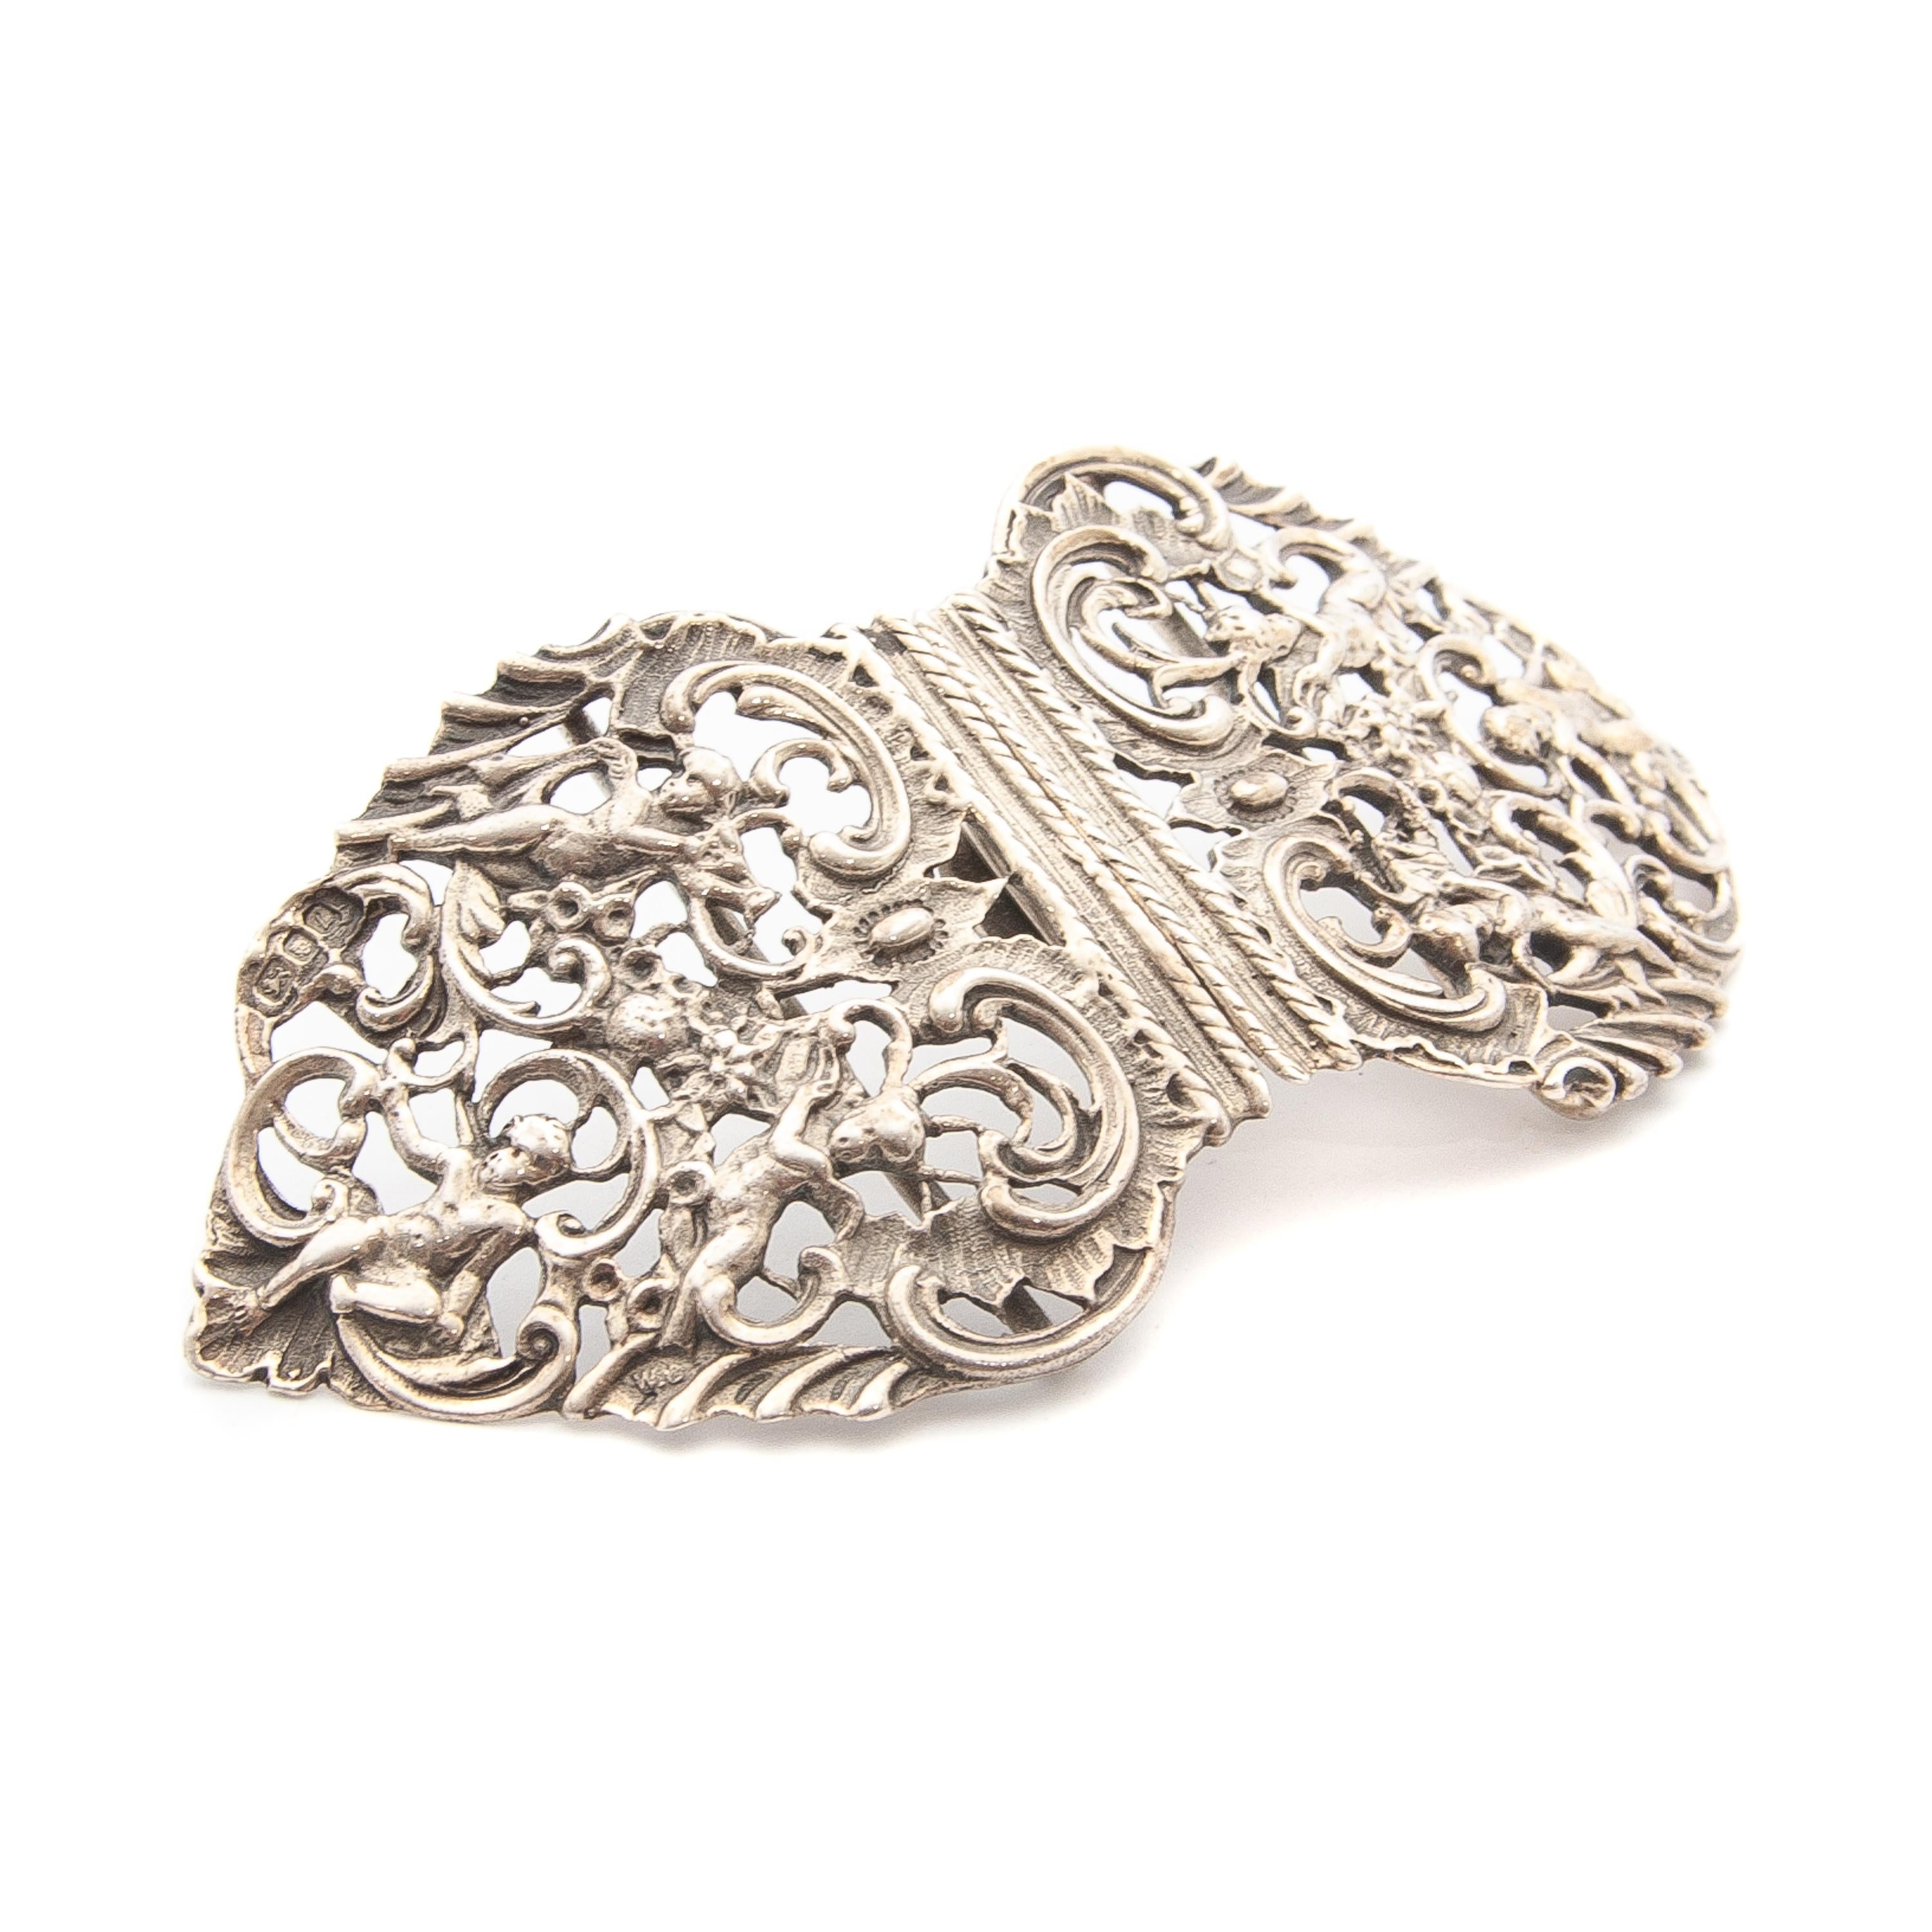 Nurses belt buckle made out of sterling silver which shows a beautiful opulent presentation. The belt buckle has a scrolling foliage openwork design, depicting with angels. The buckle is stamped with full London Hallmarks, Lion, Leopard and date